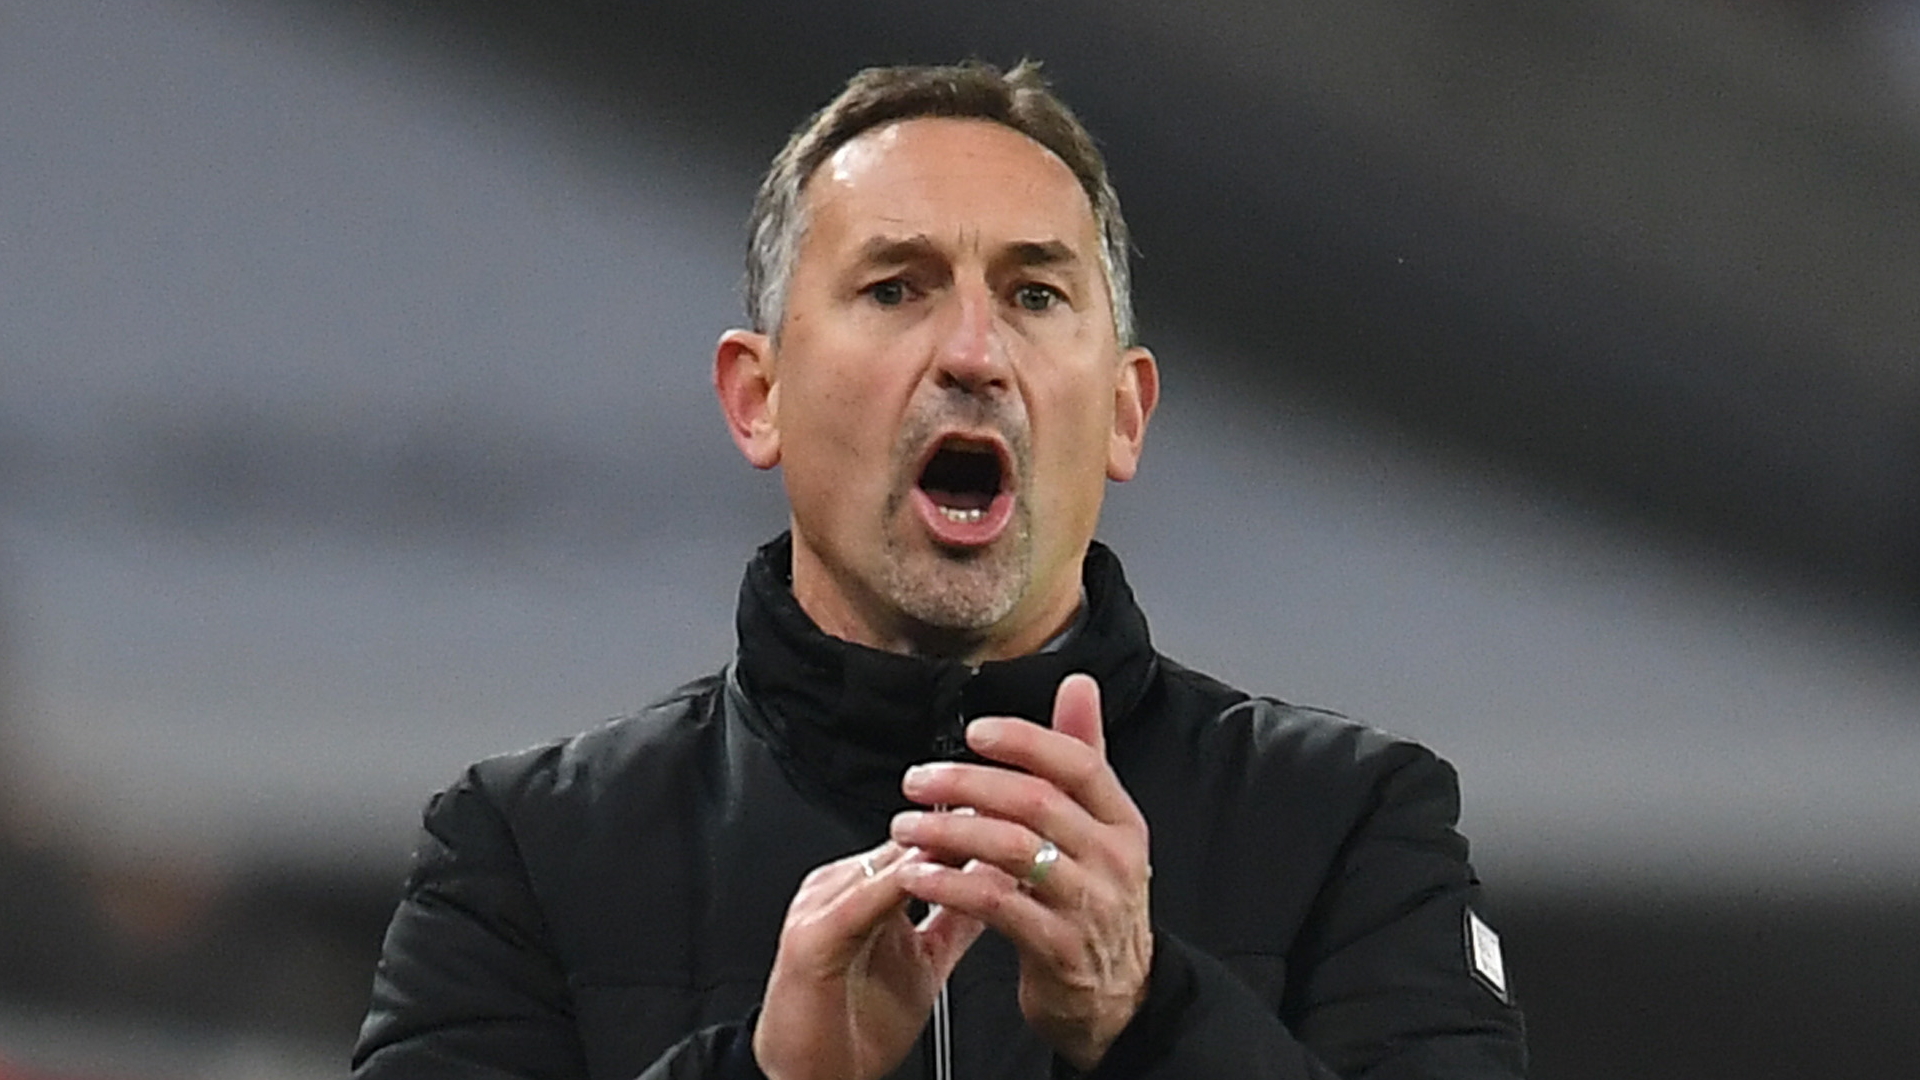 'It's funny how football can work out' - Beierlorzer takes Mainz job nine days after Cologne sacking